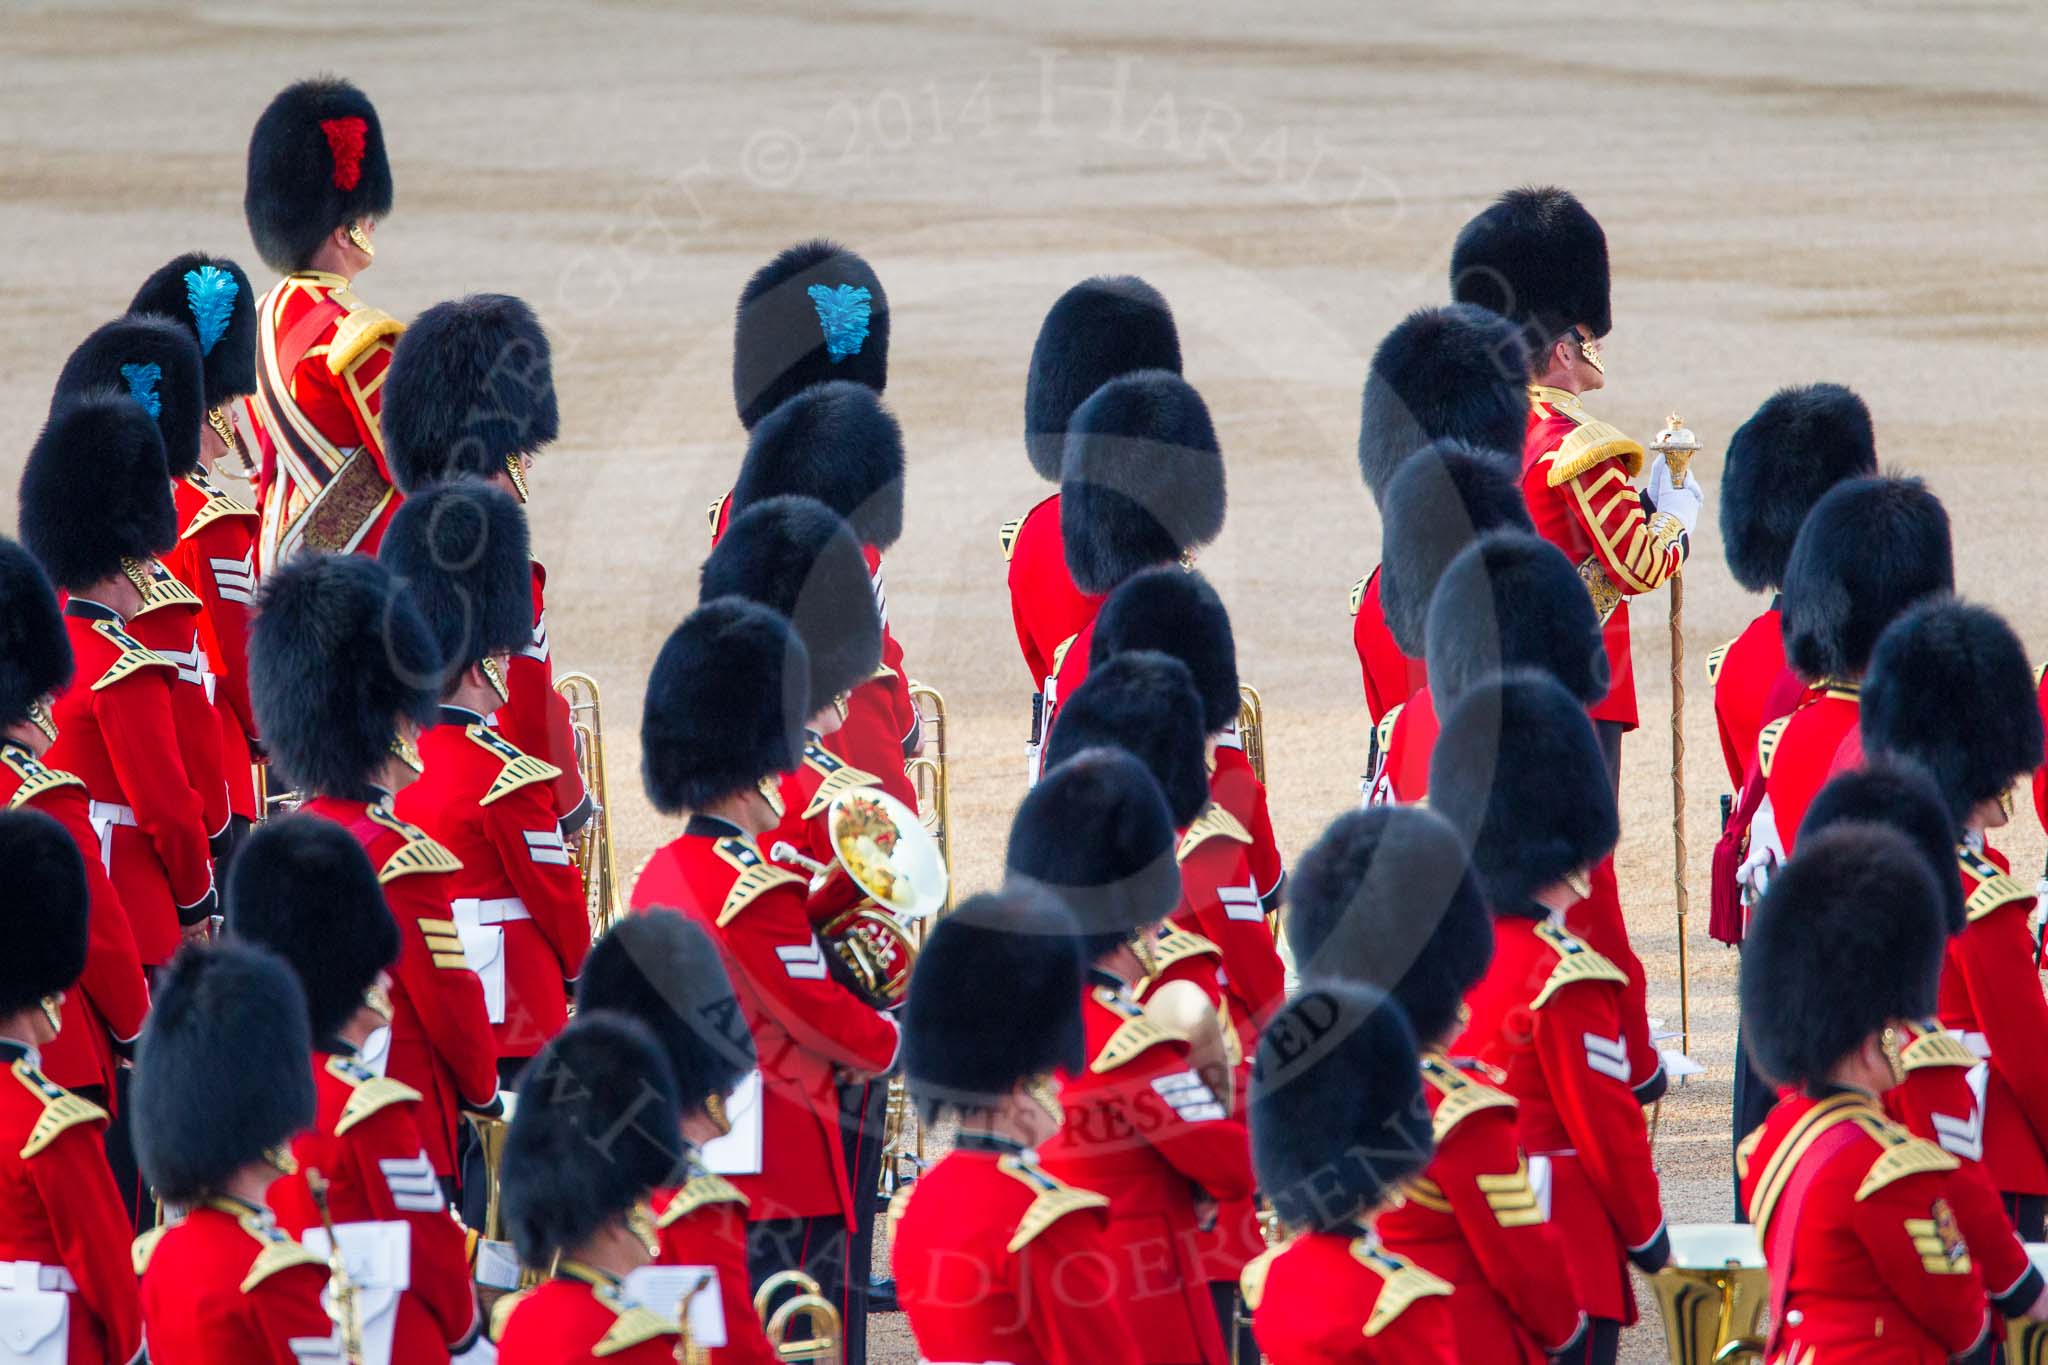 Beating Retreat 2014.
Horse Guards Parade, Westminster,
London SW1A,

United Kingdom,
on 11 June 2014 at 20:14, image #52